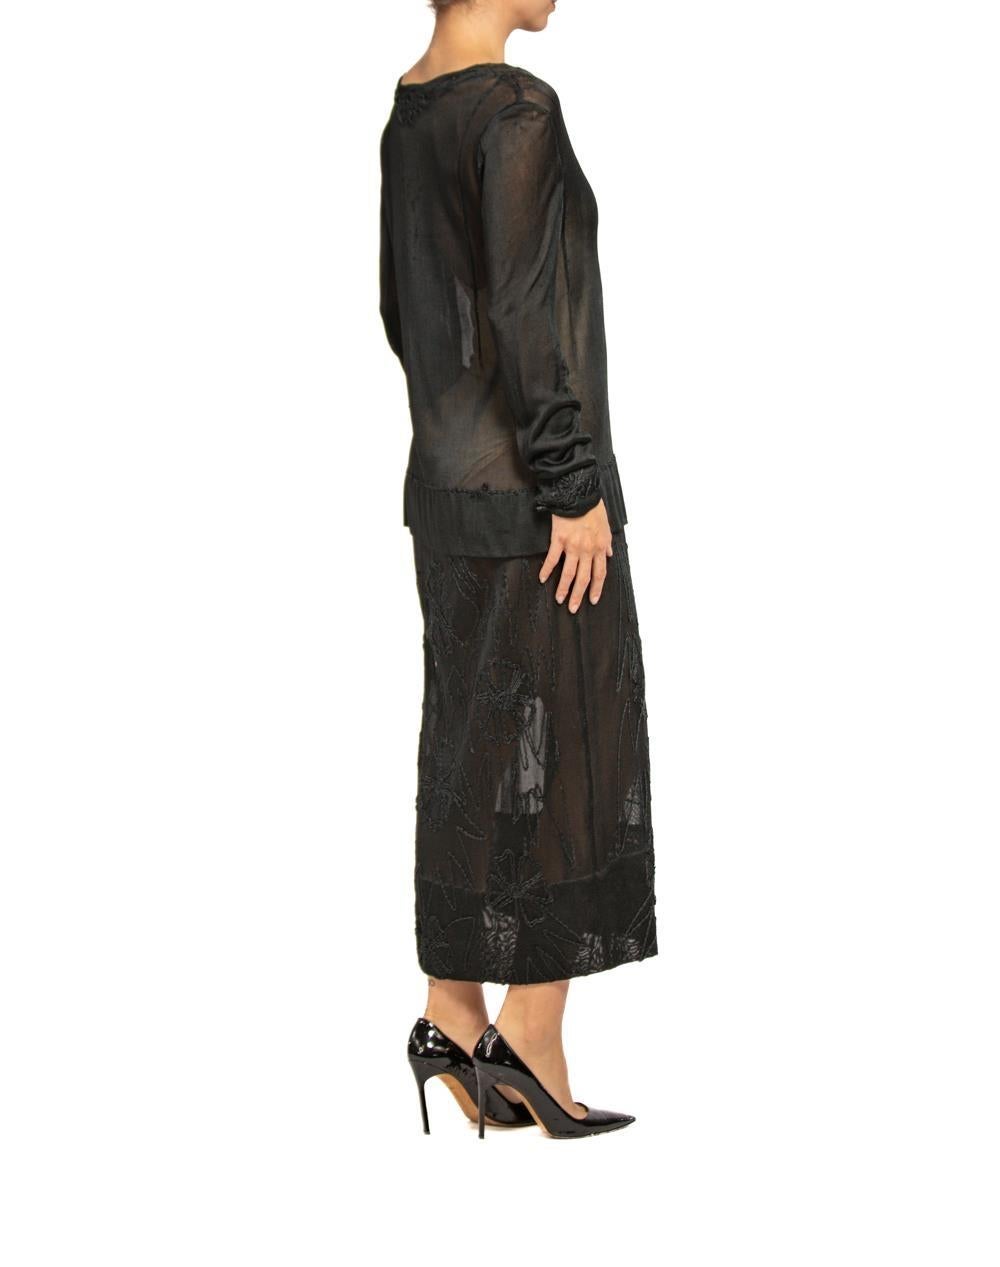 1920S Black Sheer Silk Jersey Dress With Floral Embroidery For Sale 2